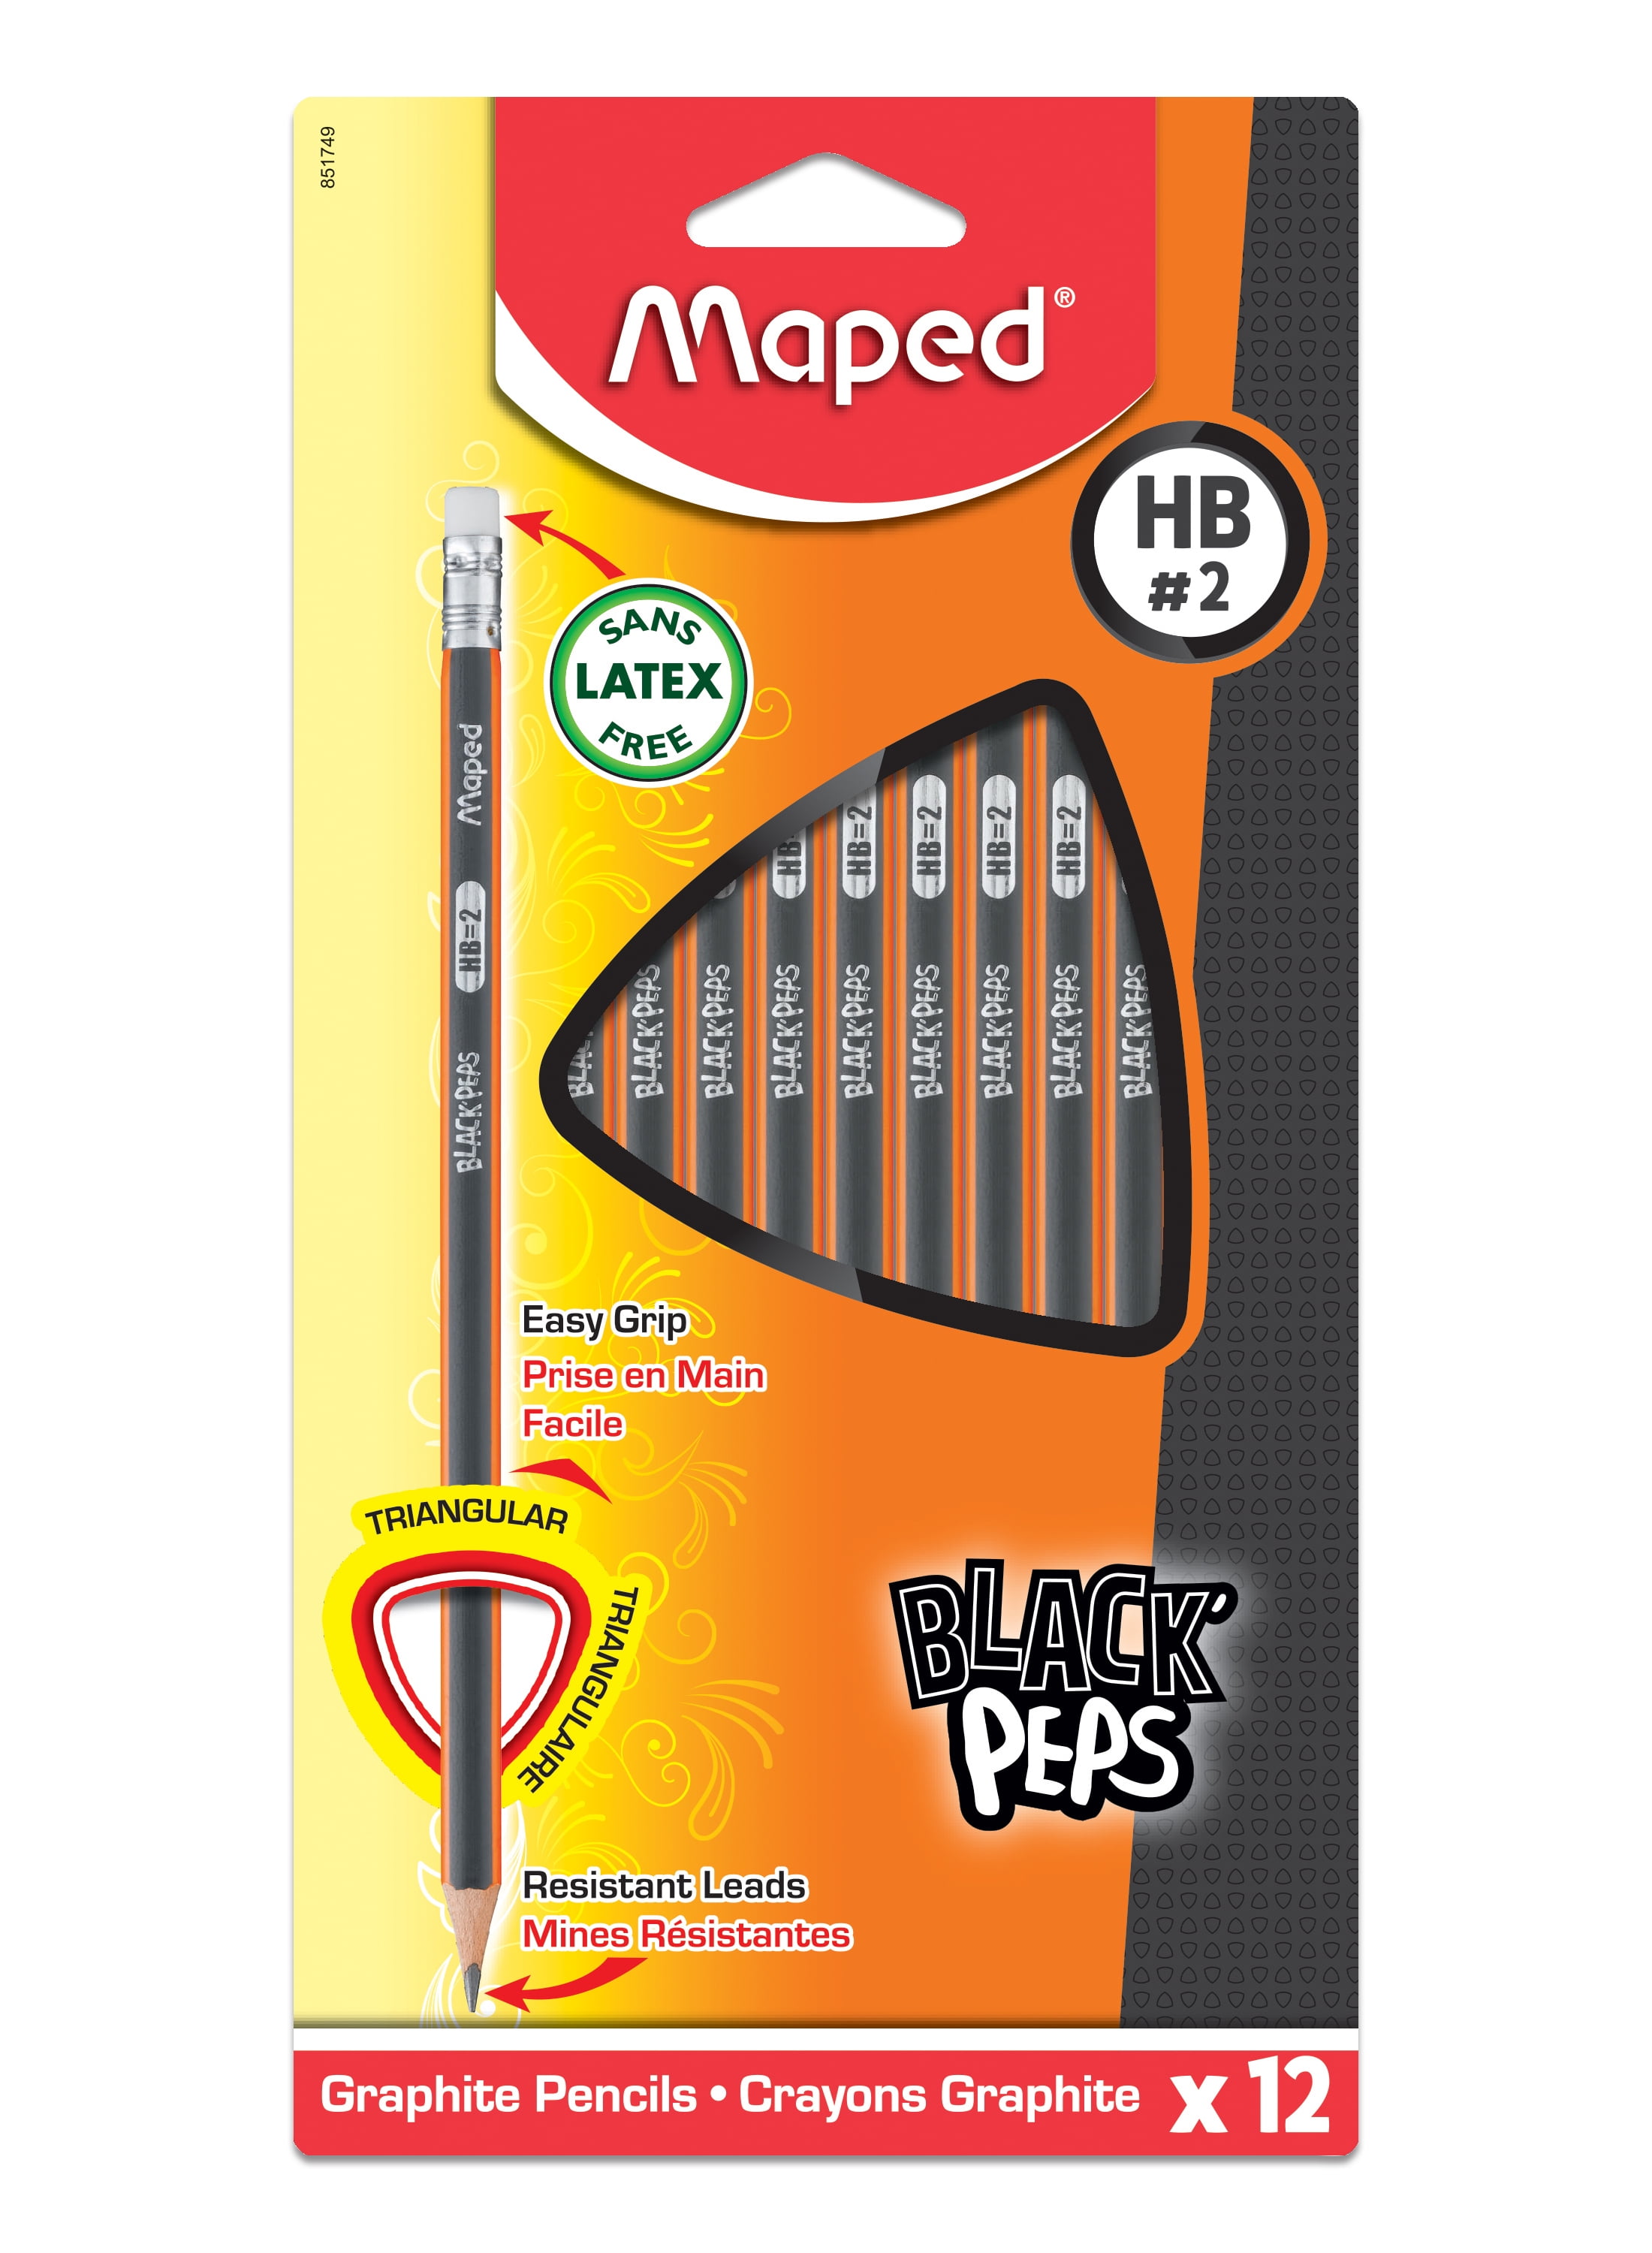 Minas 0.5 2/1 - Blackpeps - Maped – Officemate